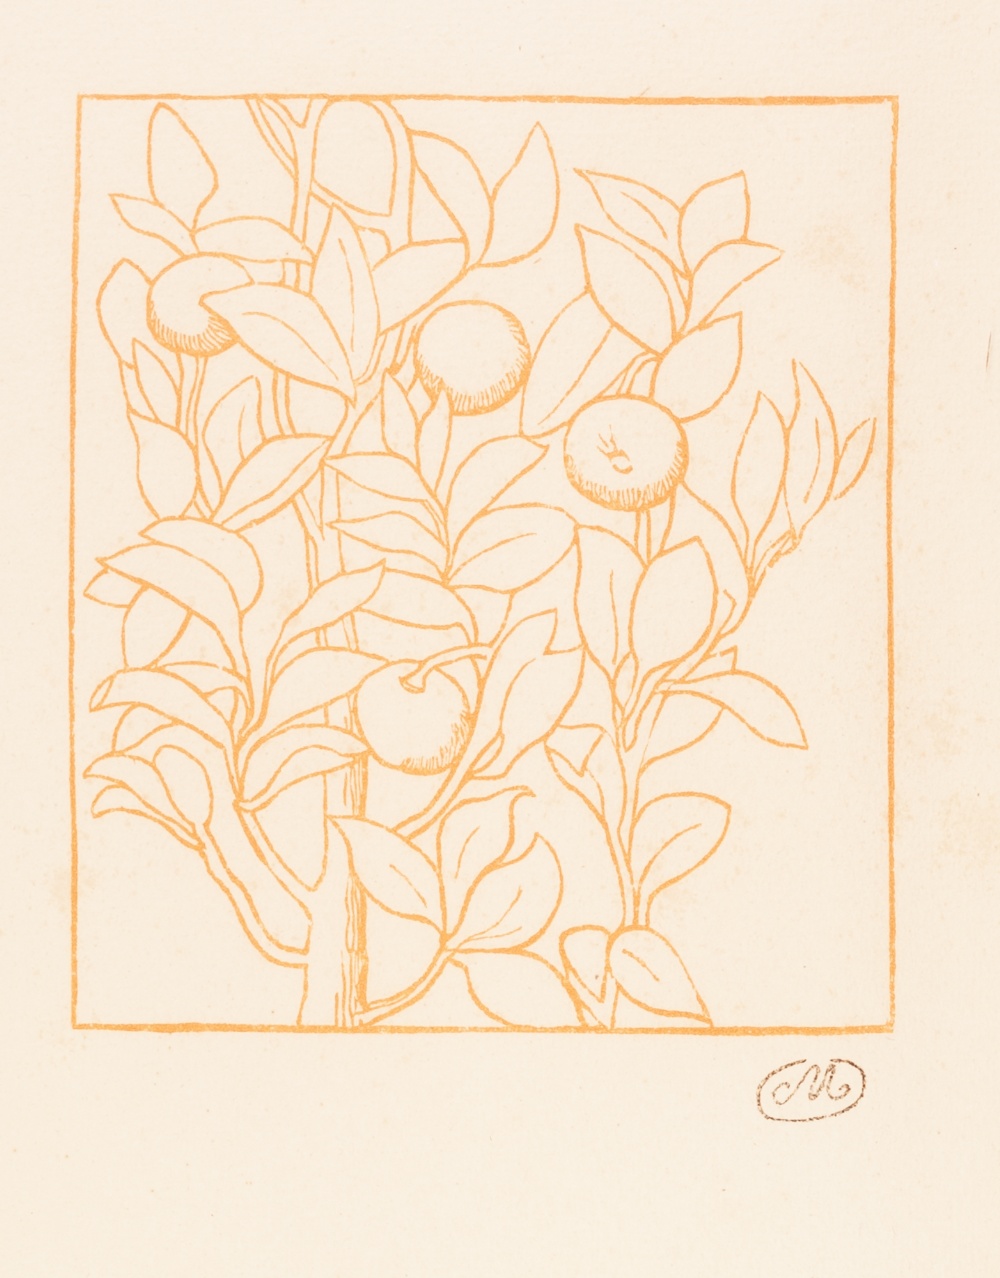 ARISTIDE MAILLOL (French 1861 - 1944) WOODCUT PRINTED IN BRICK RED 'Georgiques' Signed with